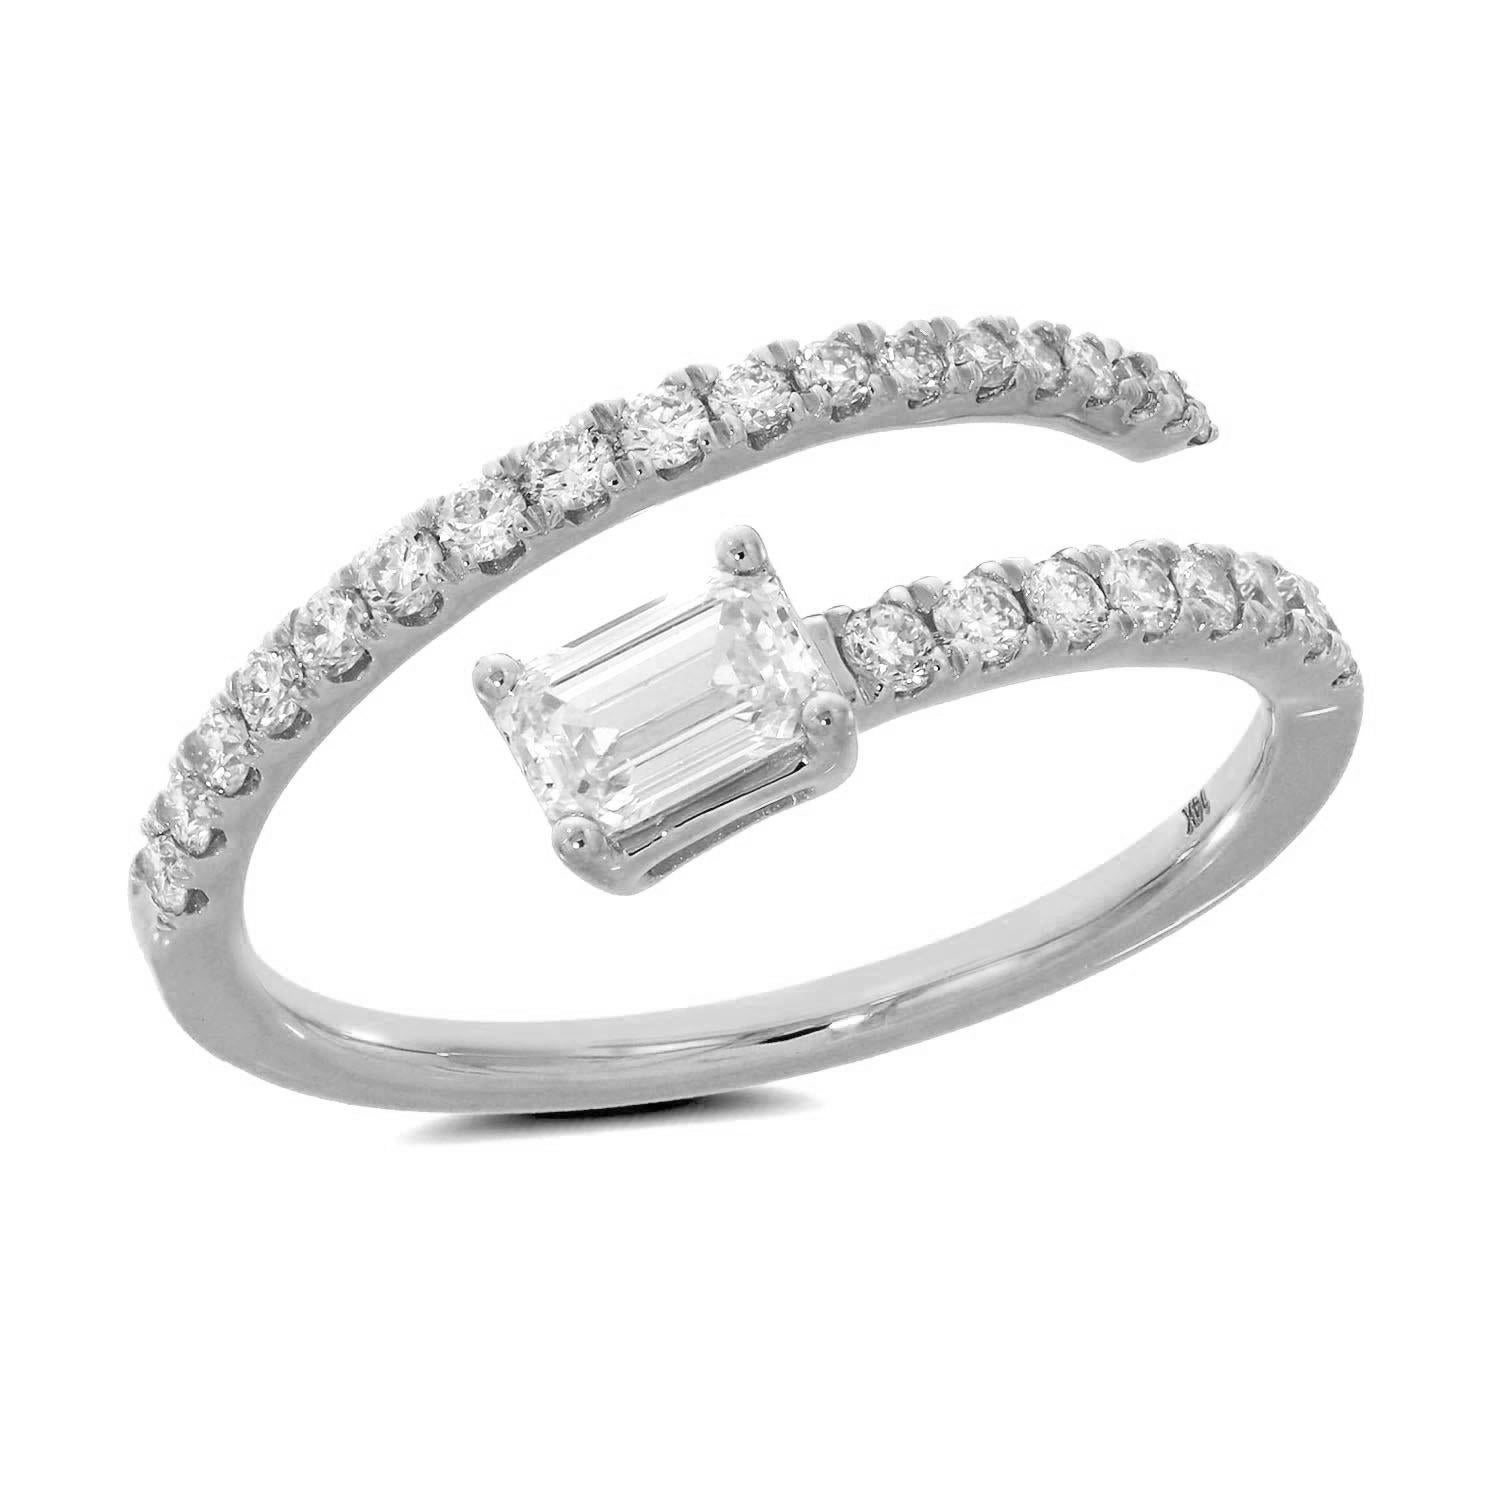 0.61 Ct Diamond Wrap Band Ring Made In 14k White Gold In New Condition For Sale In New York, NY